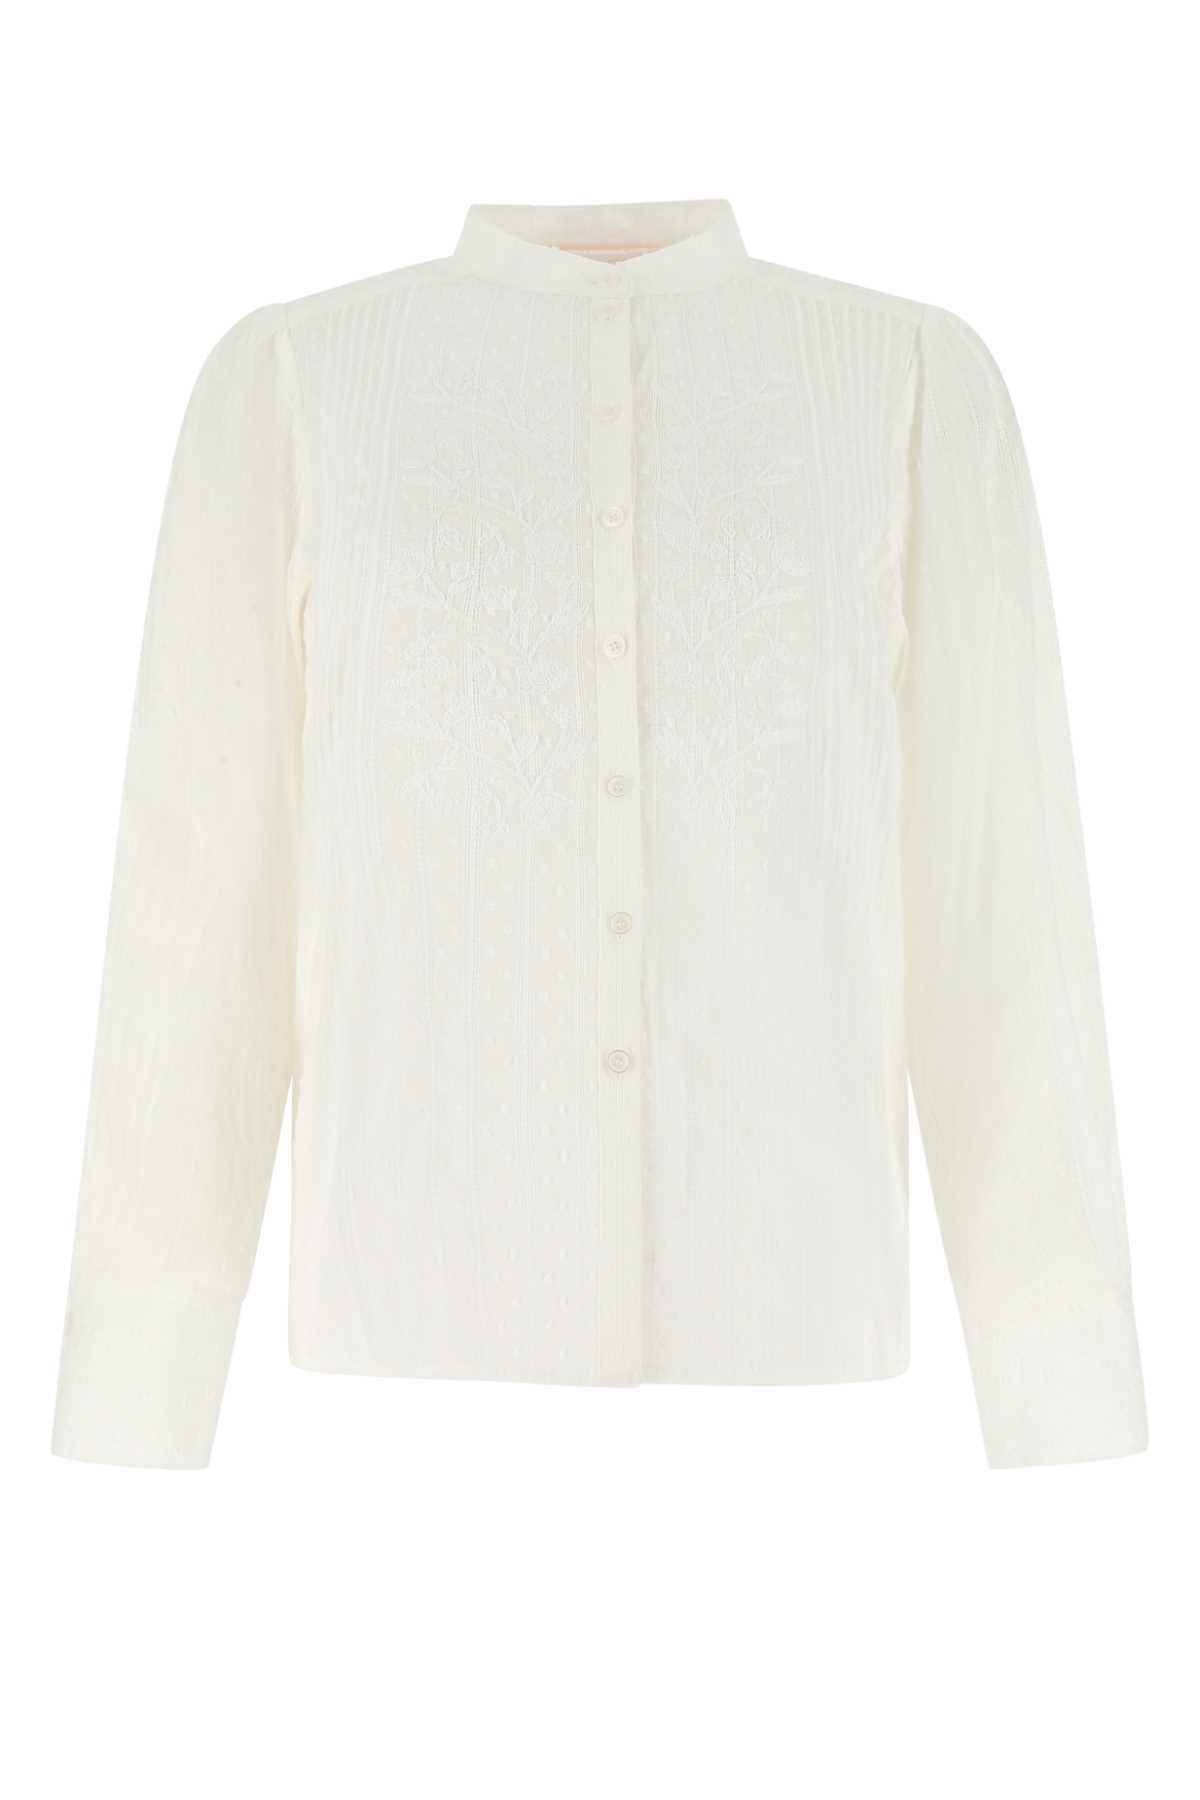 See by Chloé White Cotton Shirt